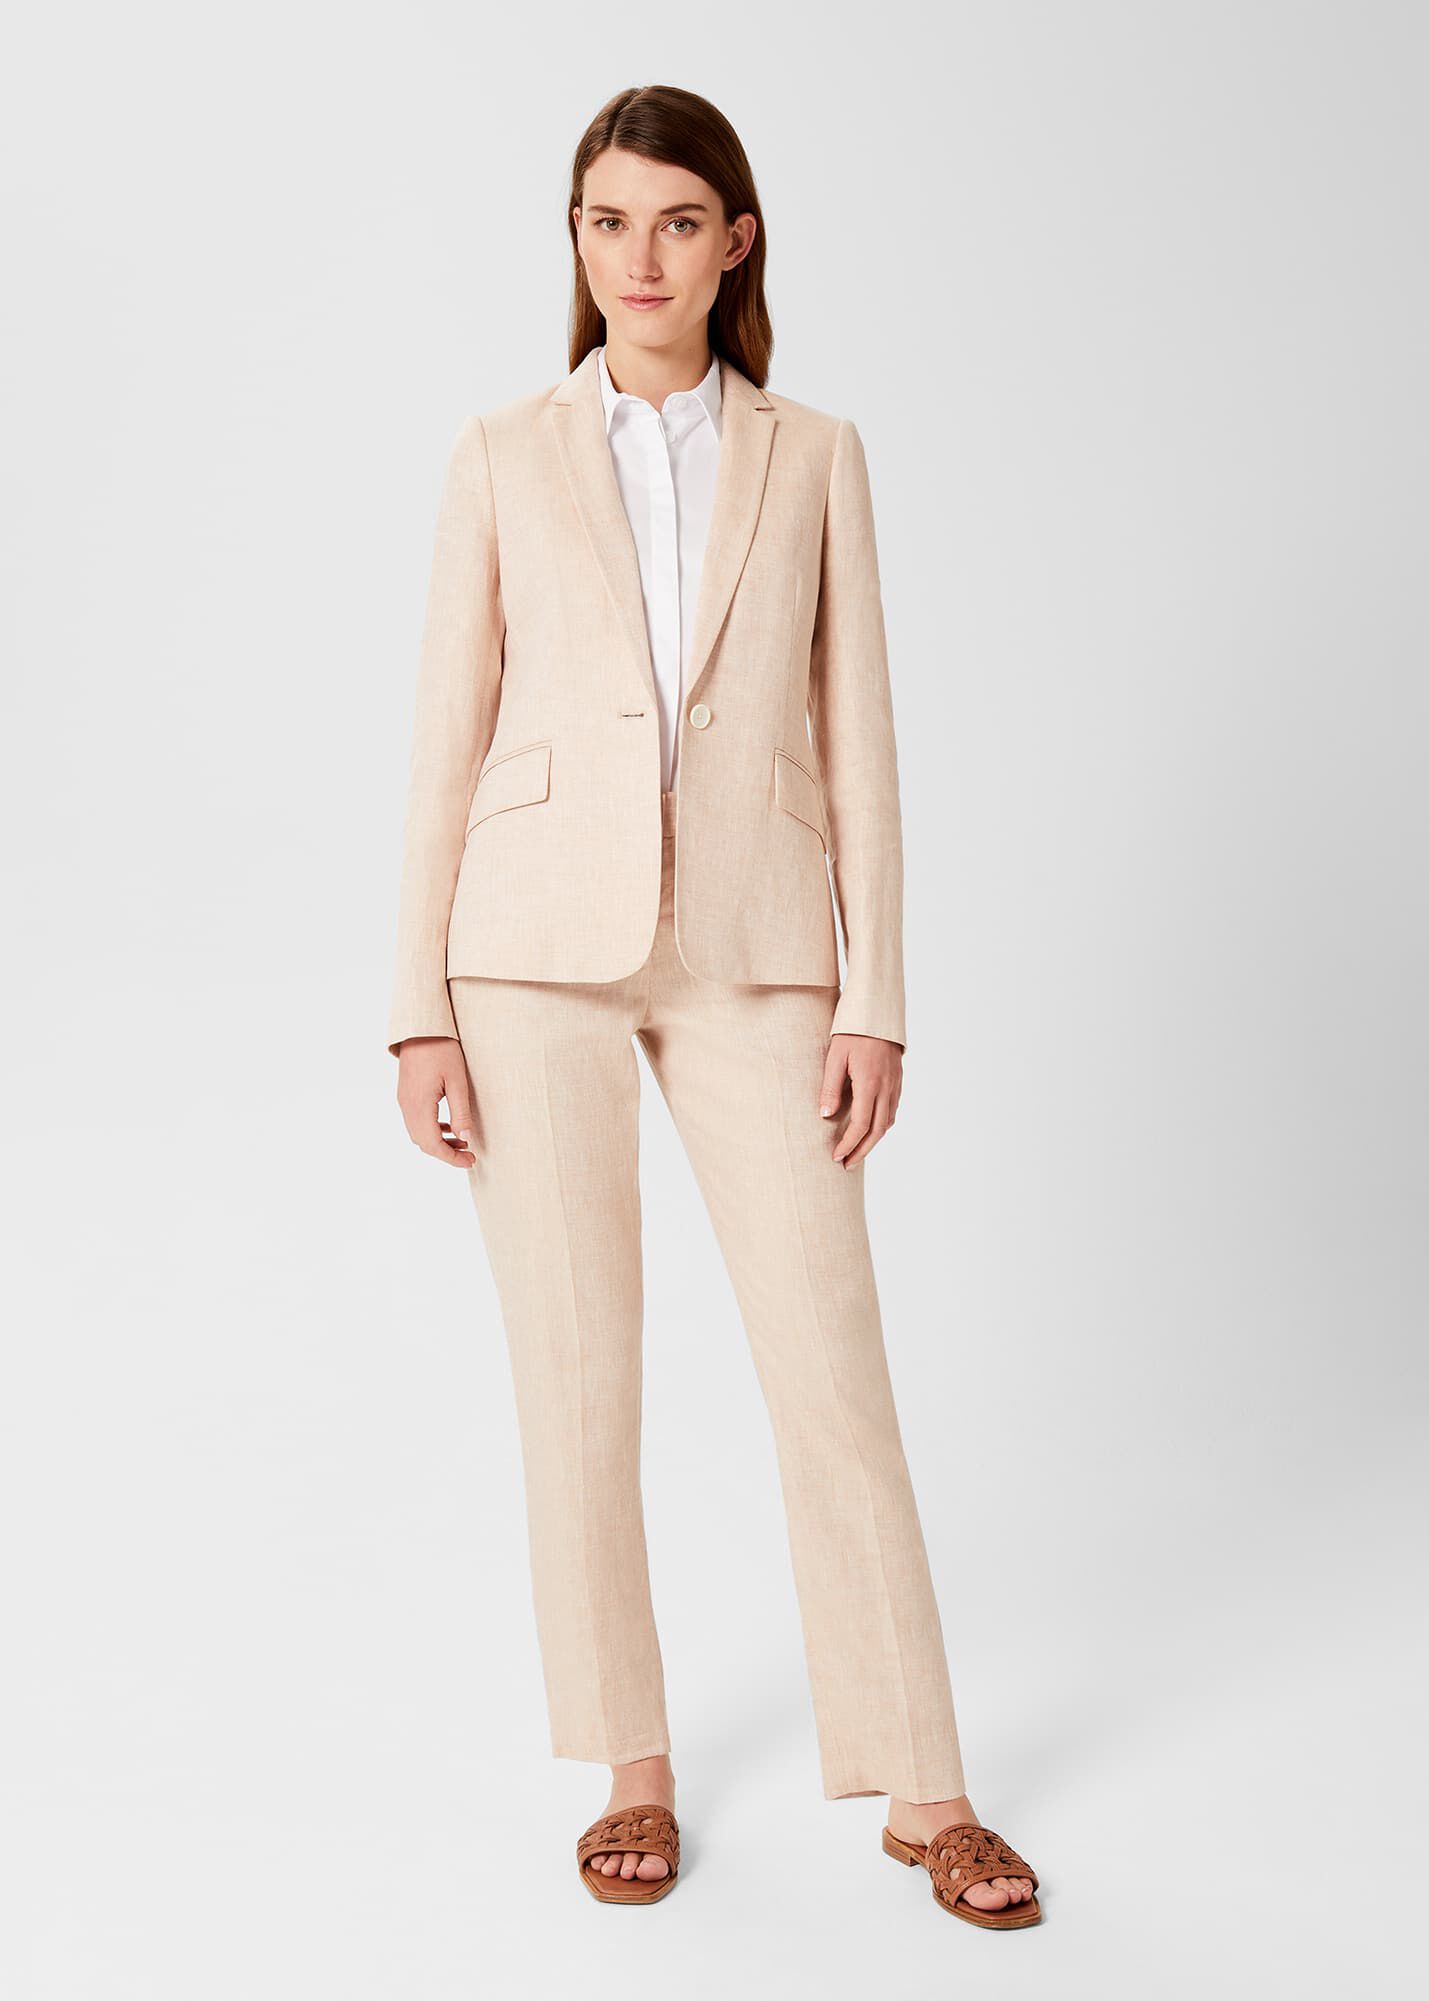 Beige Blazer Trouser Suit for Women Business Casual Outfit  Etsy   Business outfits women Pantsuits for women Suits for women